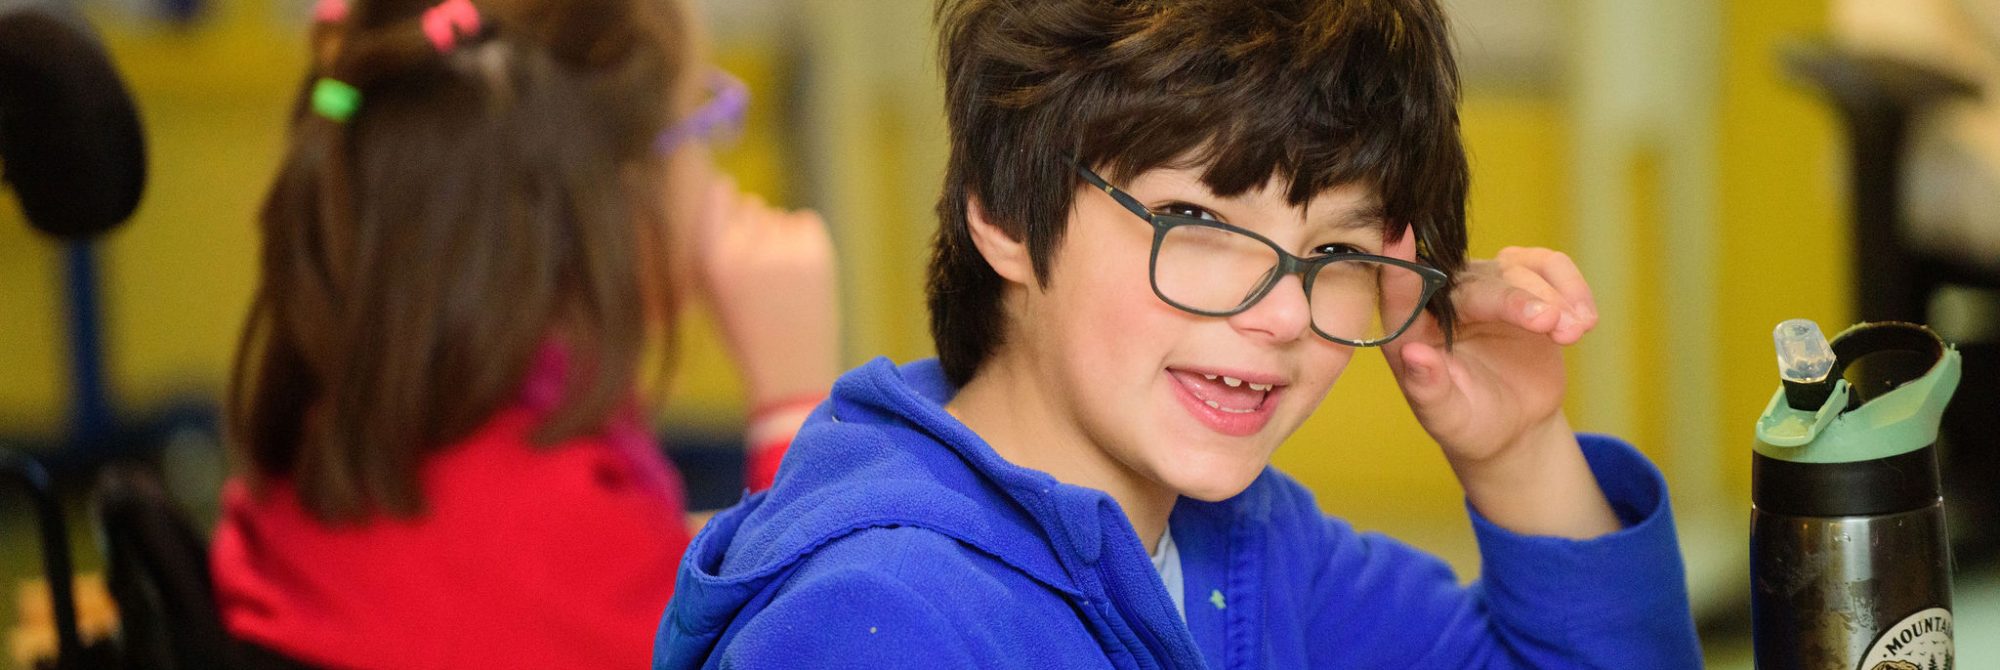 A Lower School student wearing glasses looks over his shoulder at the camera, as if he's about to say something.